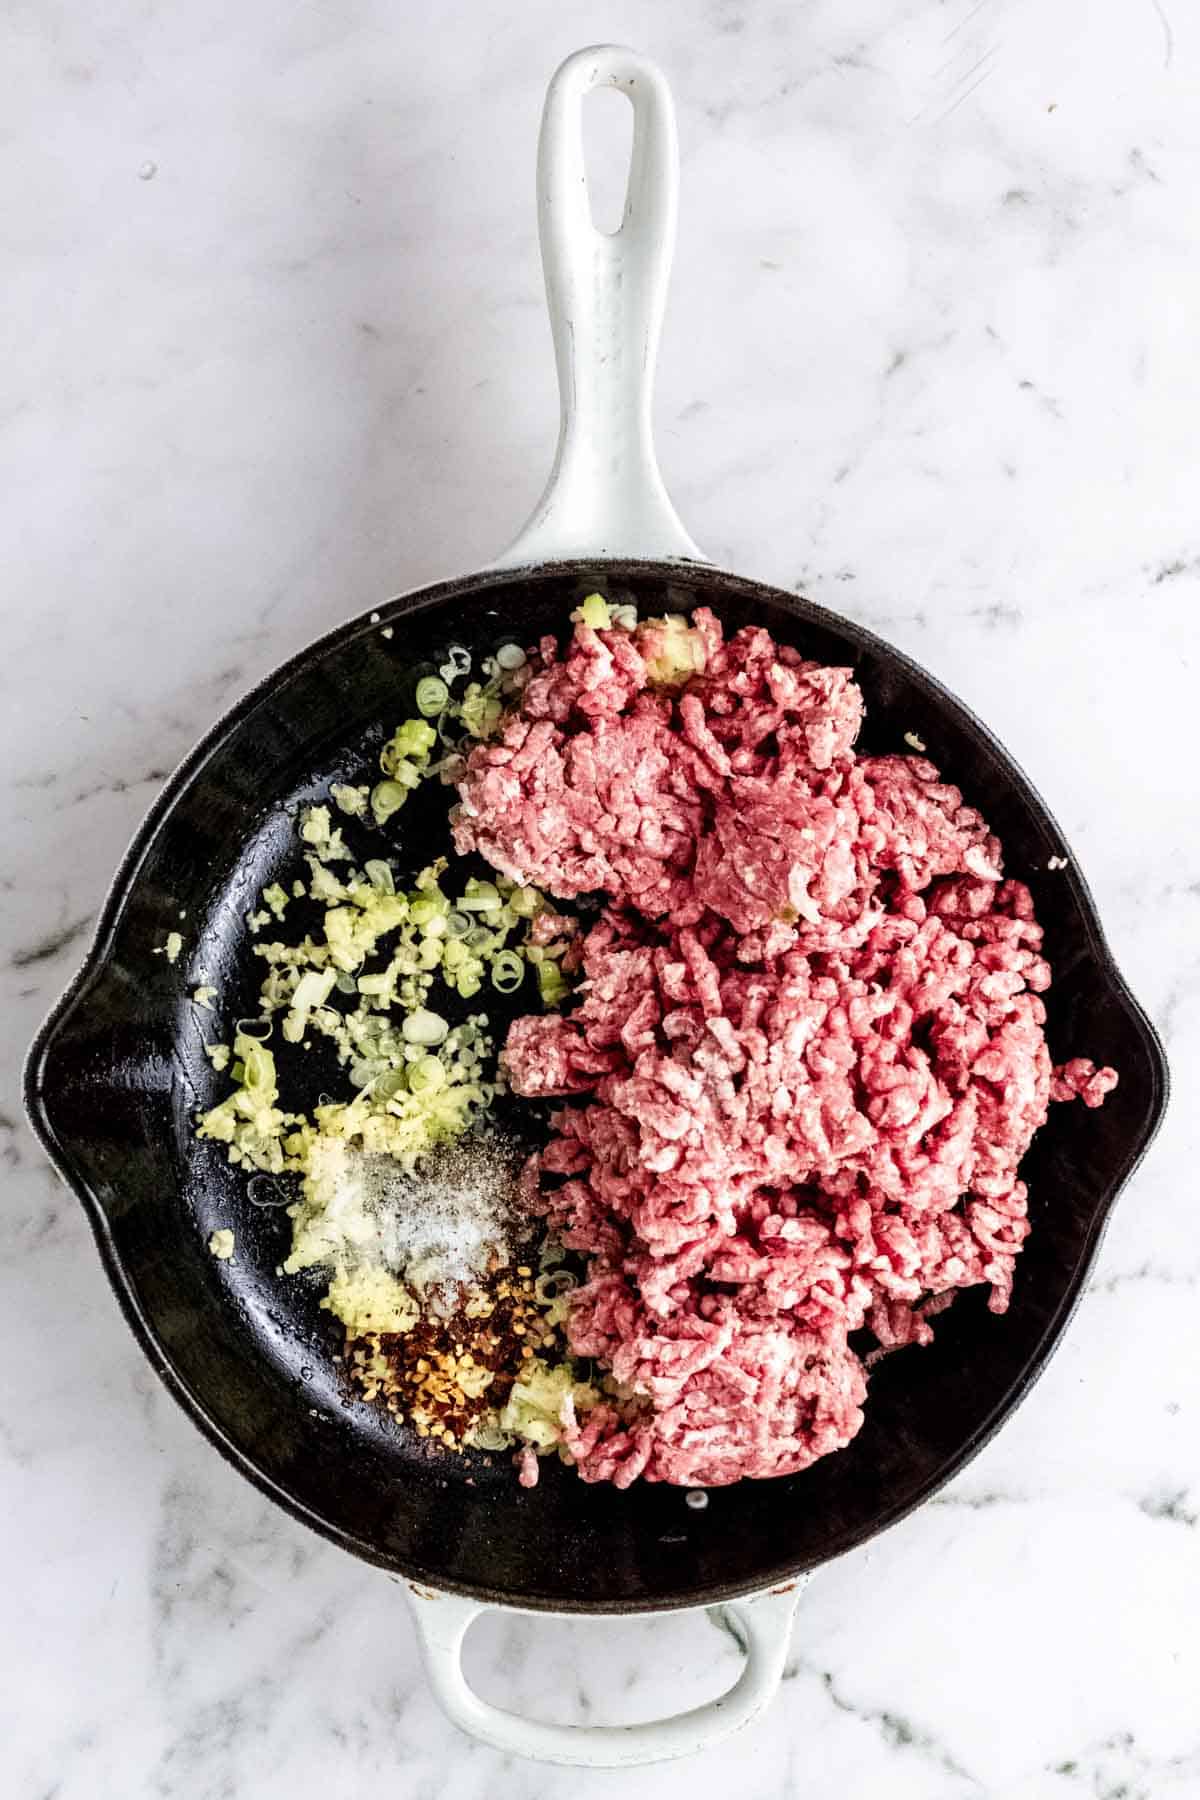 Ground beef is added to a skillet with sauted scallions.